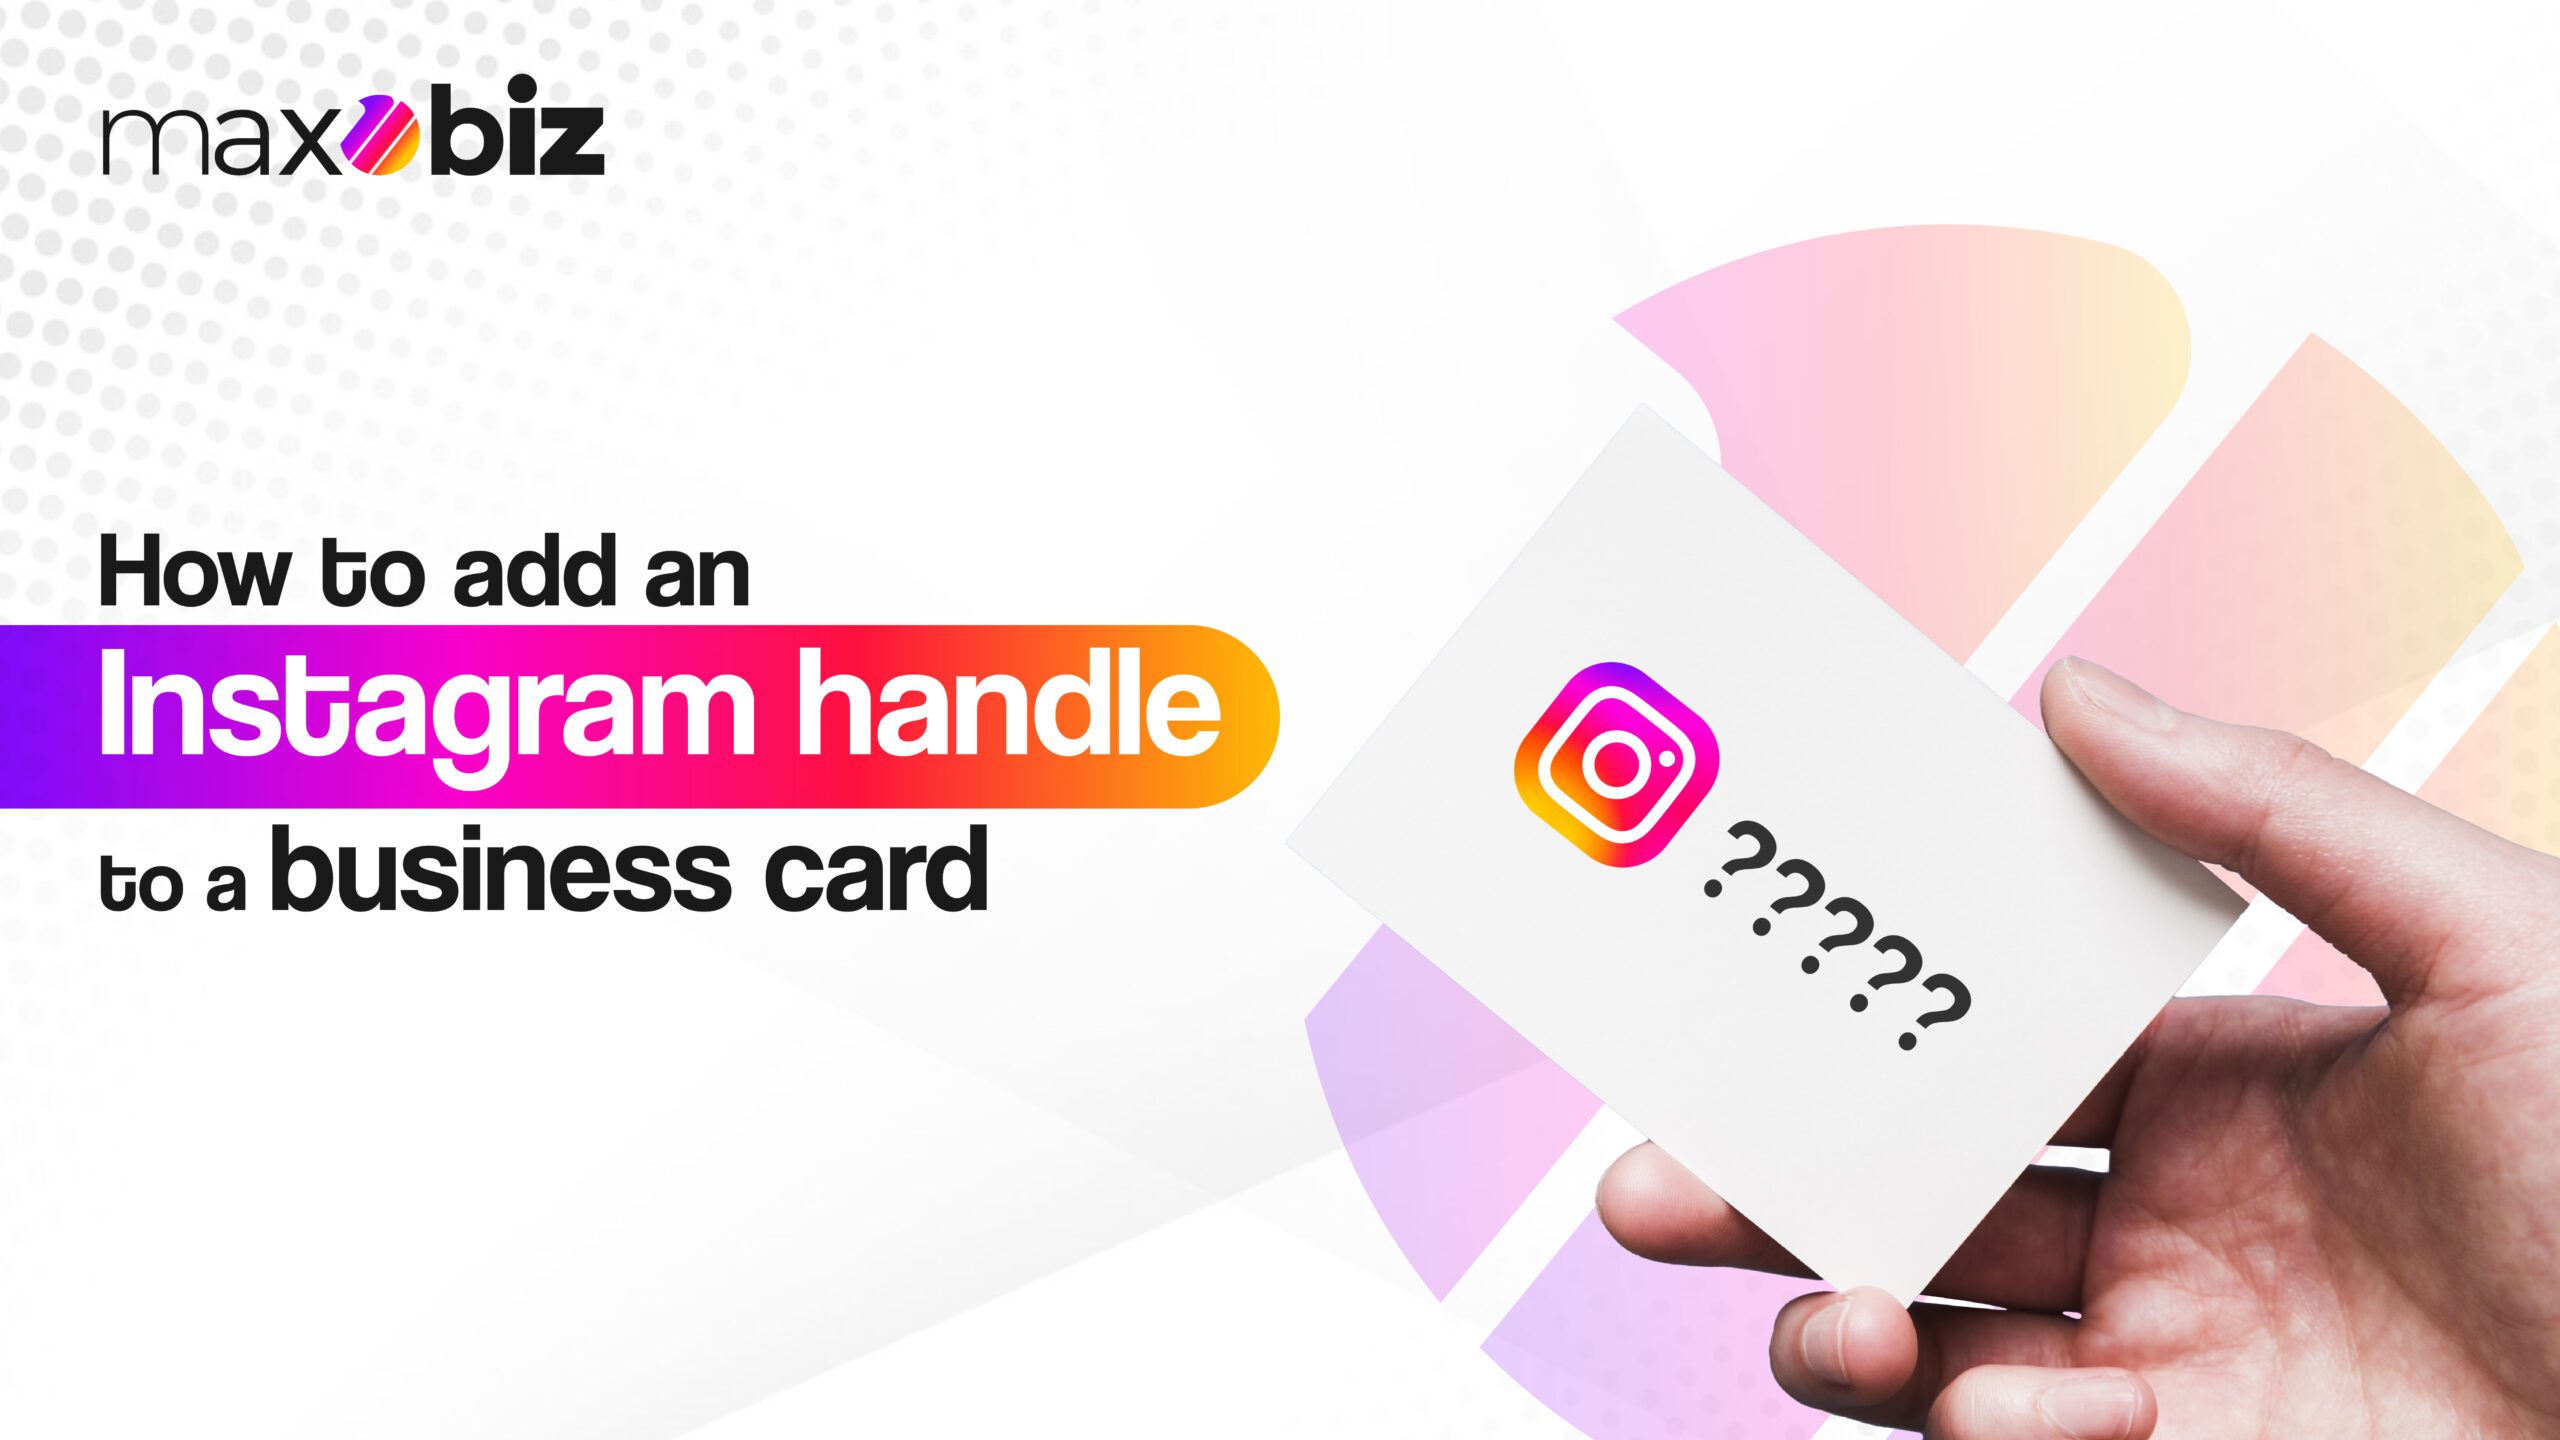 How to add an Instagram handle to a business card